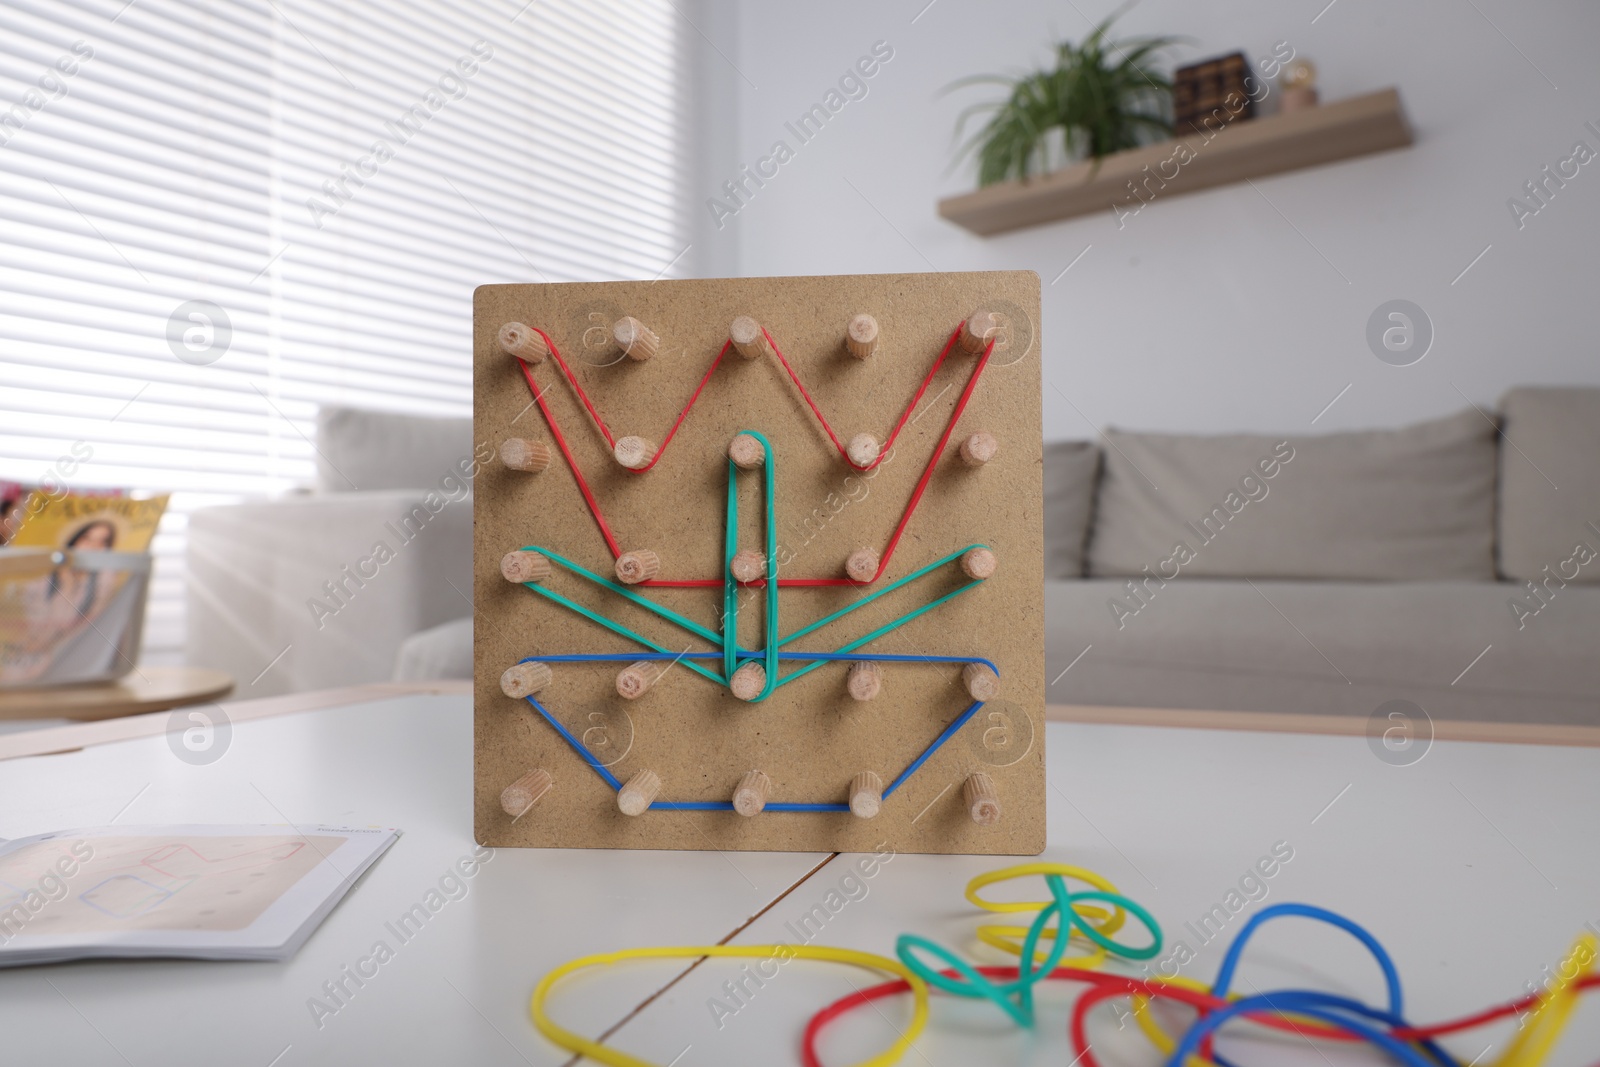 Photo of Wooden geoboard with flower made of rubber bands on white table in room. Motor skills development